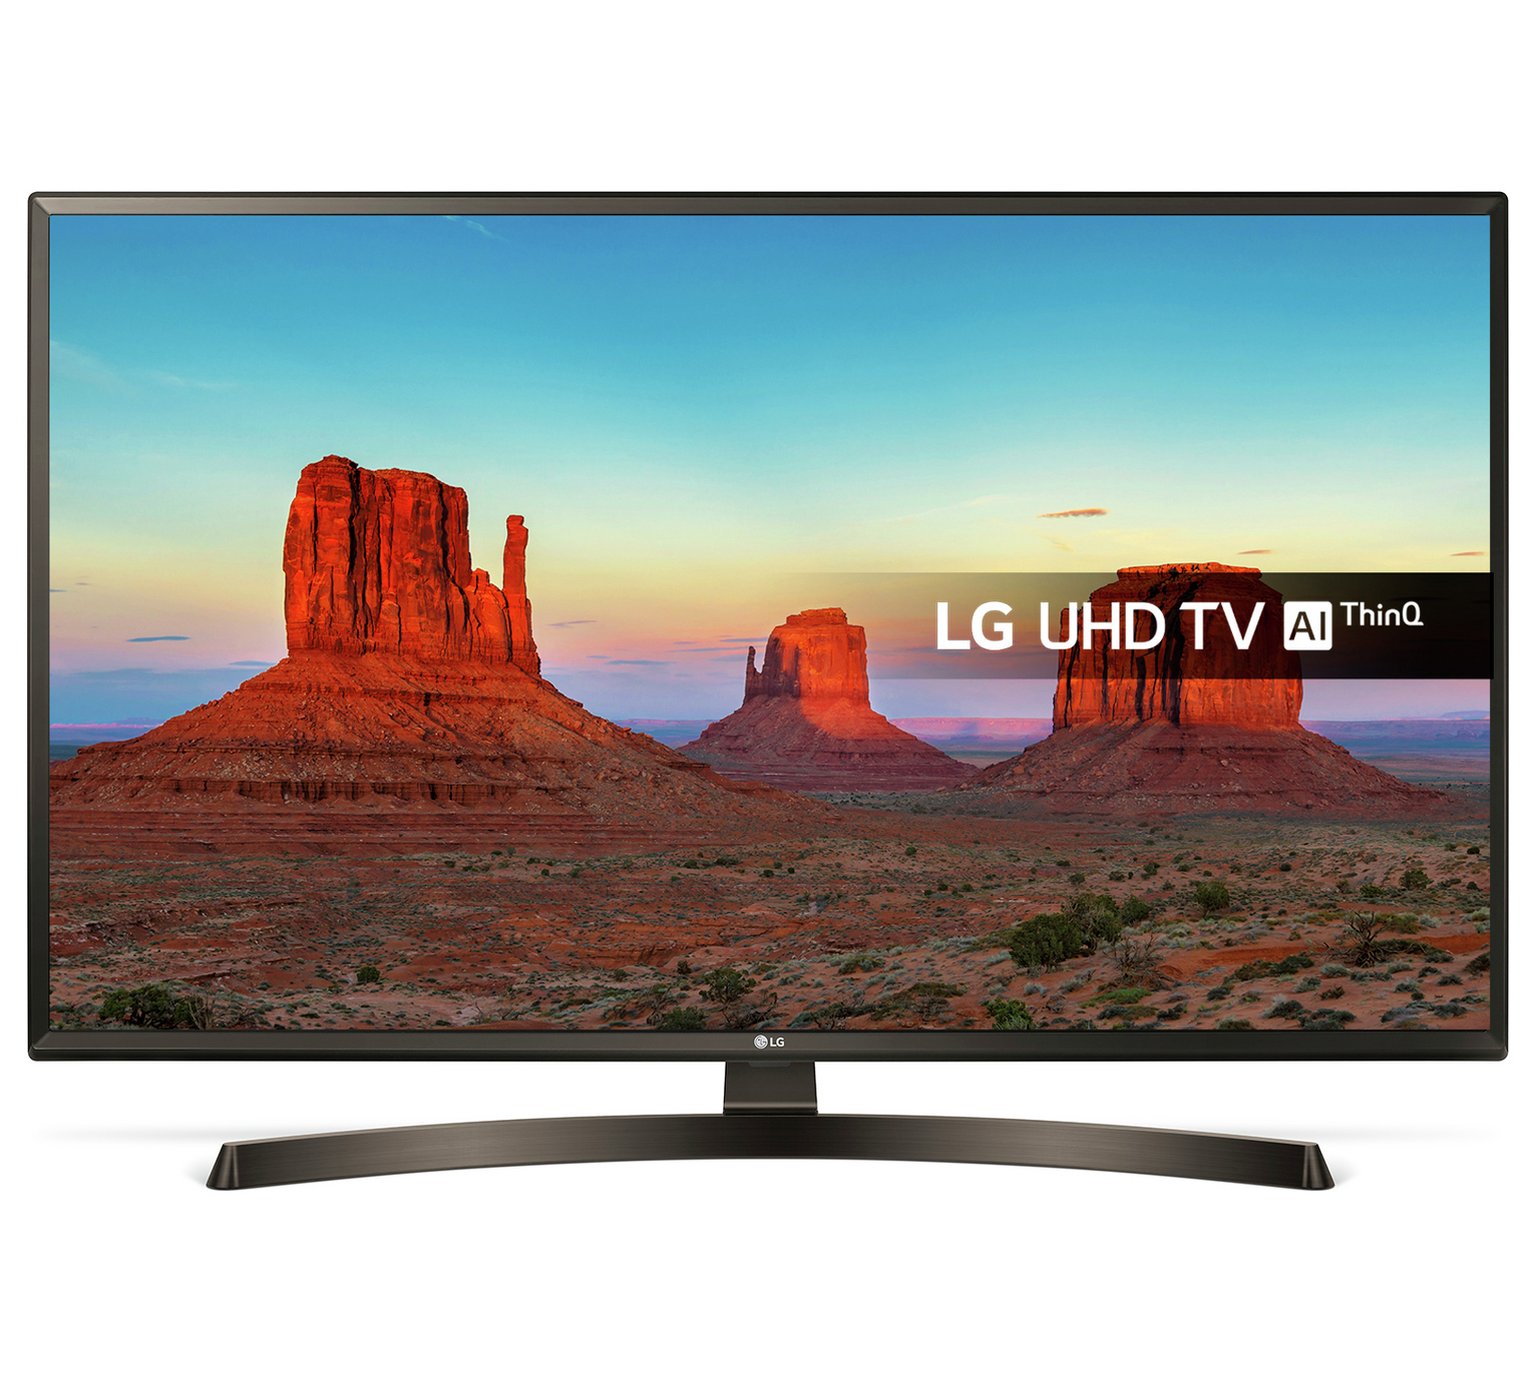 LG 49 Inch 49UK6400PLF Smart Ultra HD 4K TV with HDR by LG 819/3469